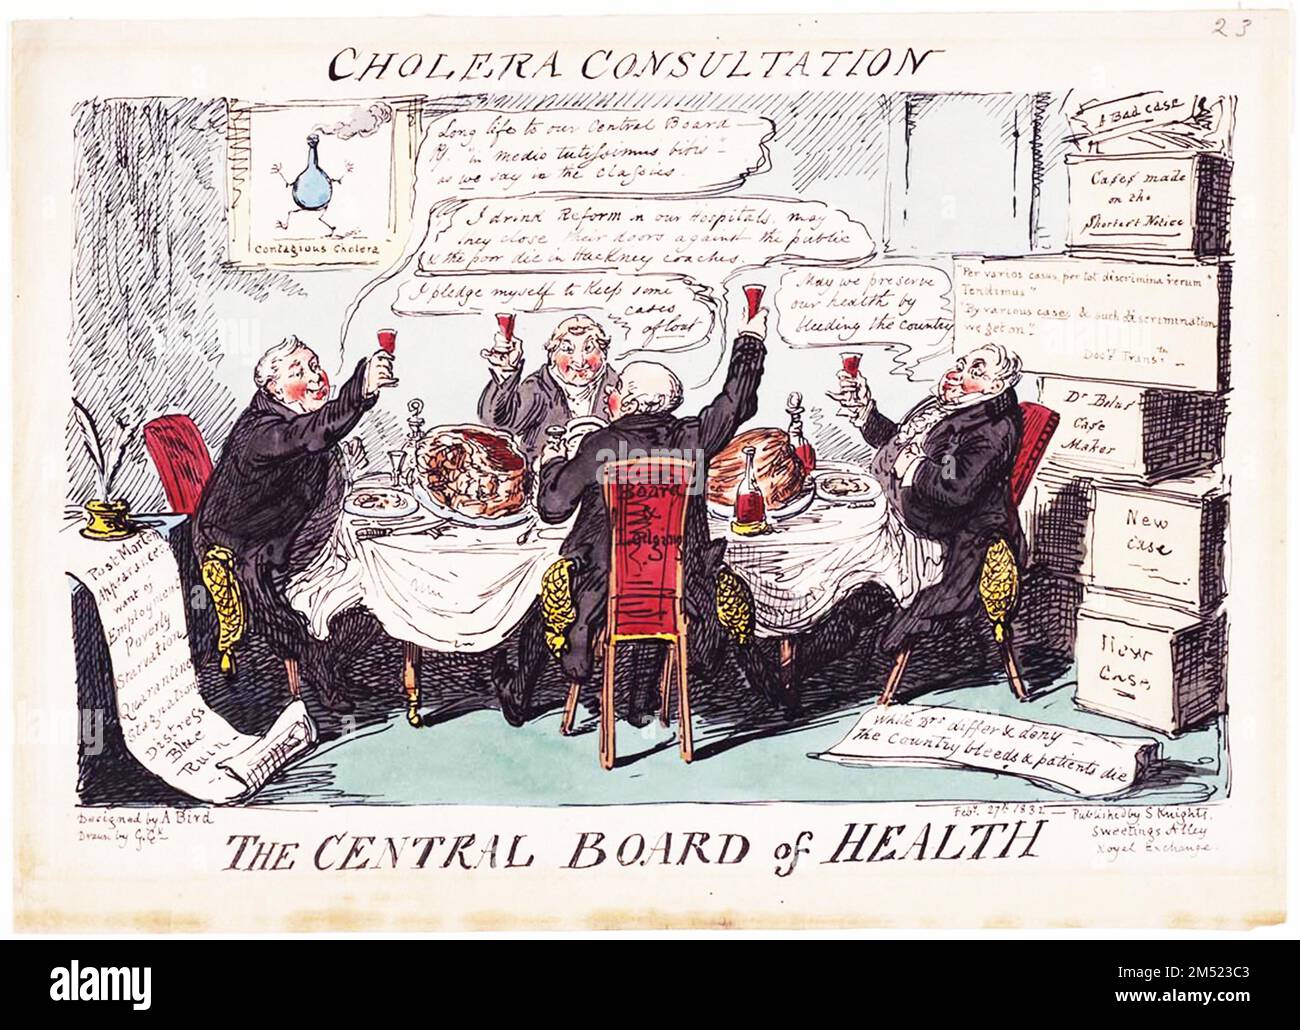 The artist George Cruikshank comments on the corruption and uselessness of public health officials in this satire from 1832. In the early nineteenth century cholera epidemics were common. The disease struck its victims rapidly and spread fear amongst the populace. Medical science was ineffective against cholera until John Snow's discovery of its contagion through contaminated water in 1848. Stock Photo